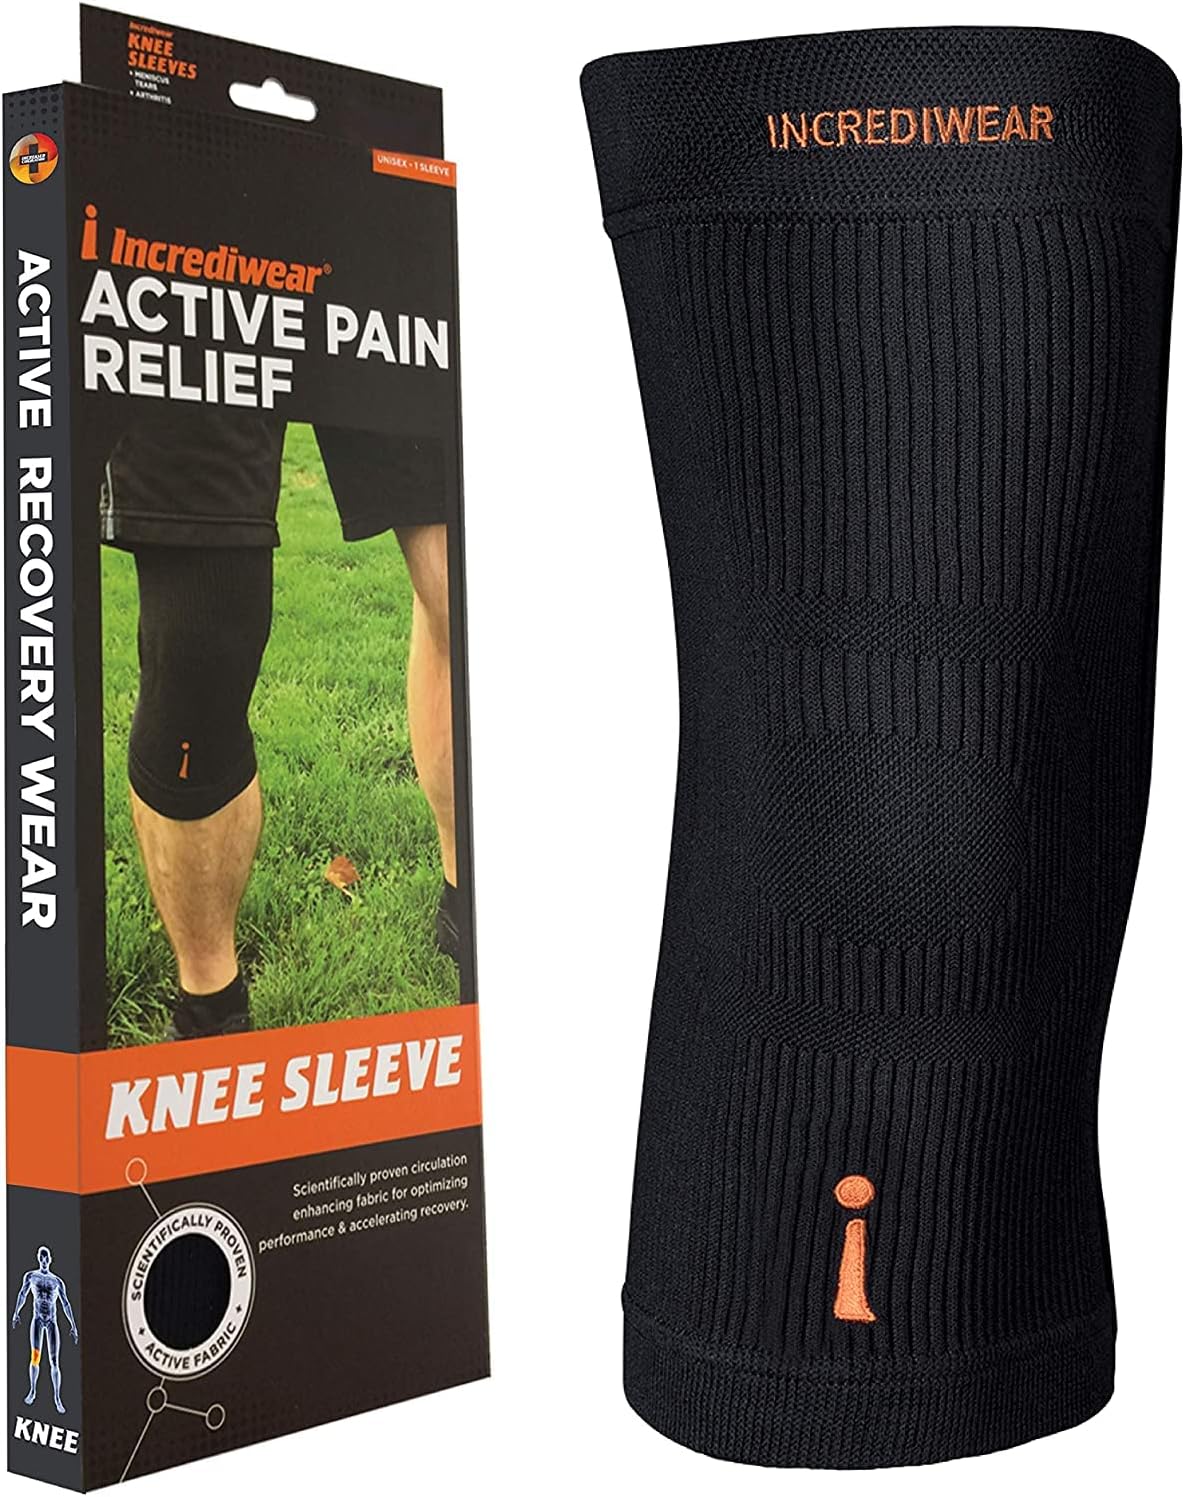 Incrediwear Knee Sleeve – Knee Braces for Knee Pain, Joint Pain Relief, Swelling, Inflammation Relief, and Circulation, Knee Support for Women and Men